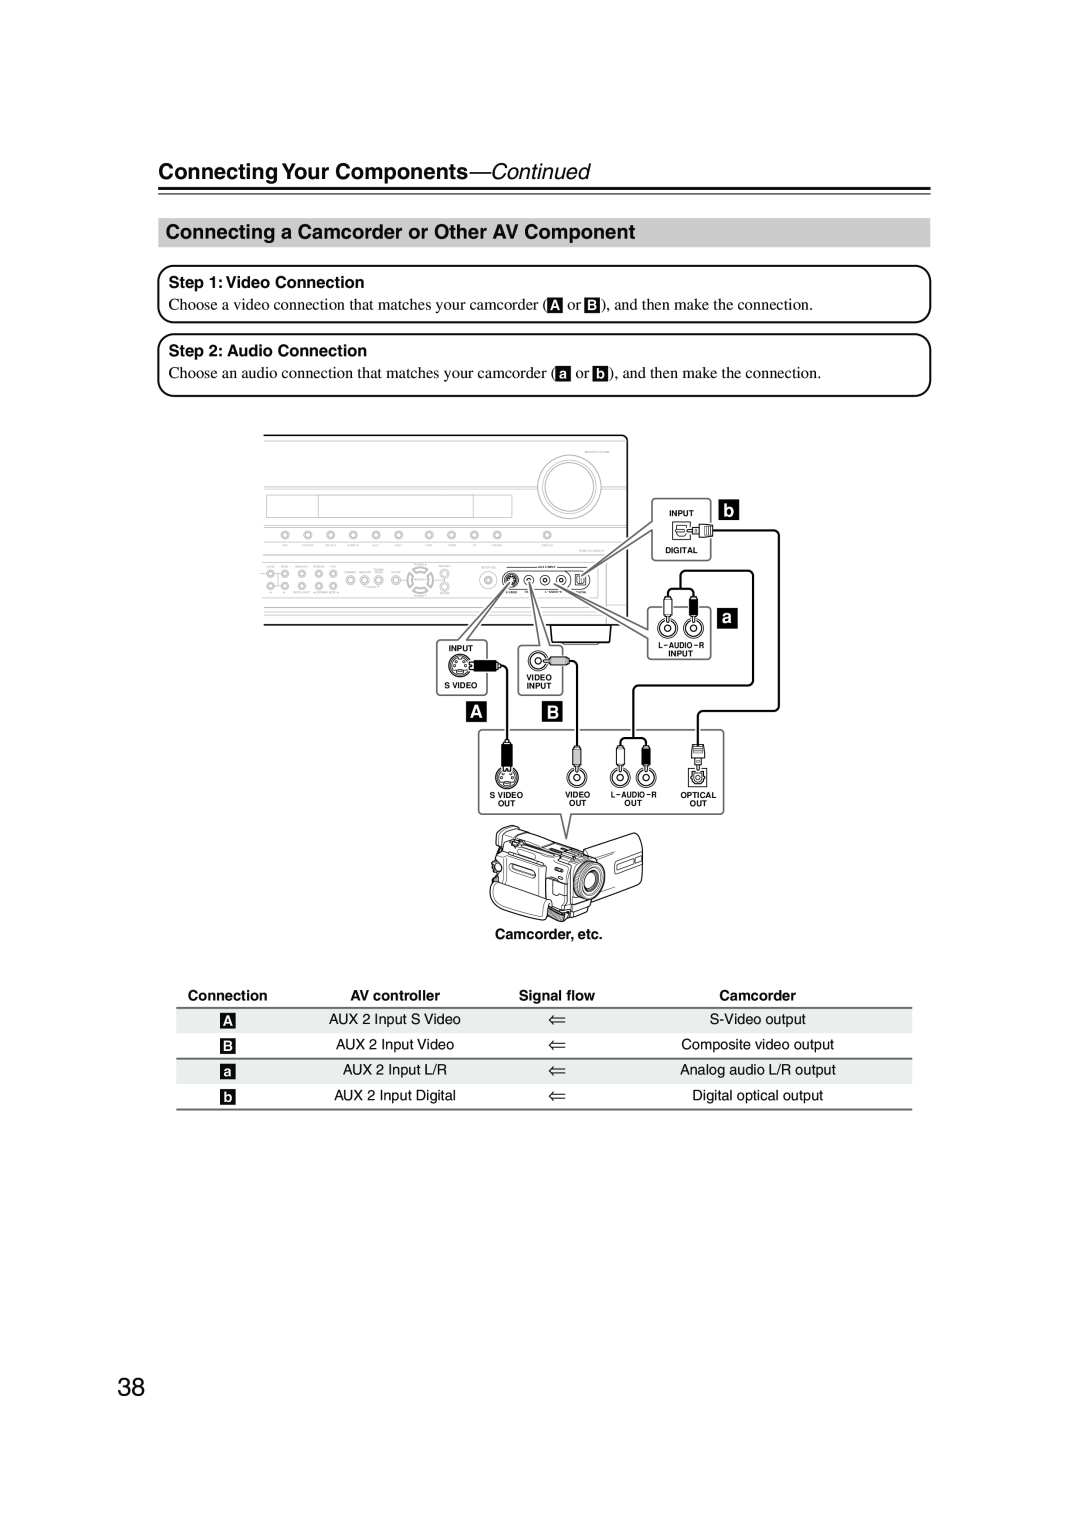 Onkyo PR-SC885 instruction manual Connecting a Camcorder or Other AV Component, Connecting Your Components—Continued 